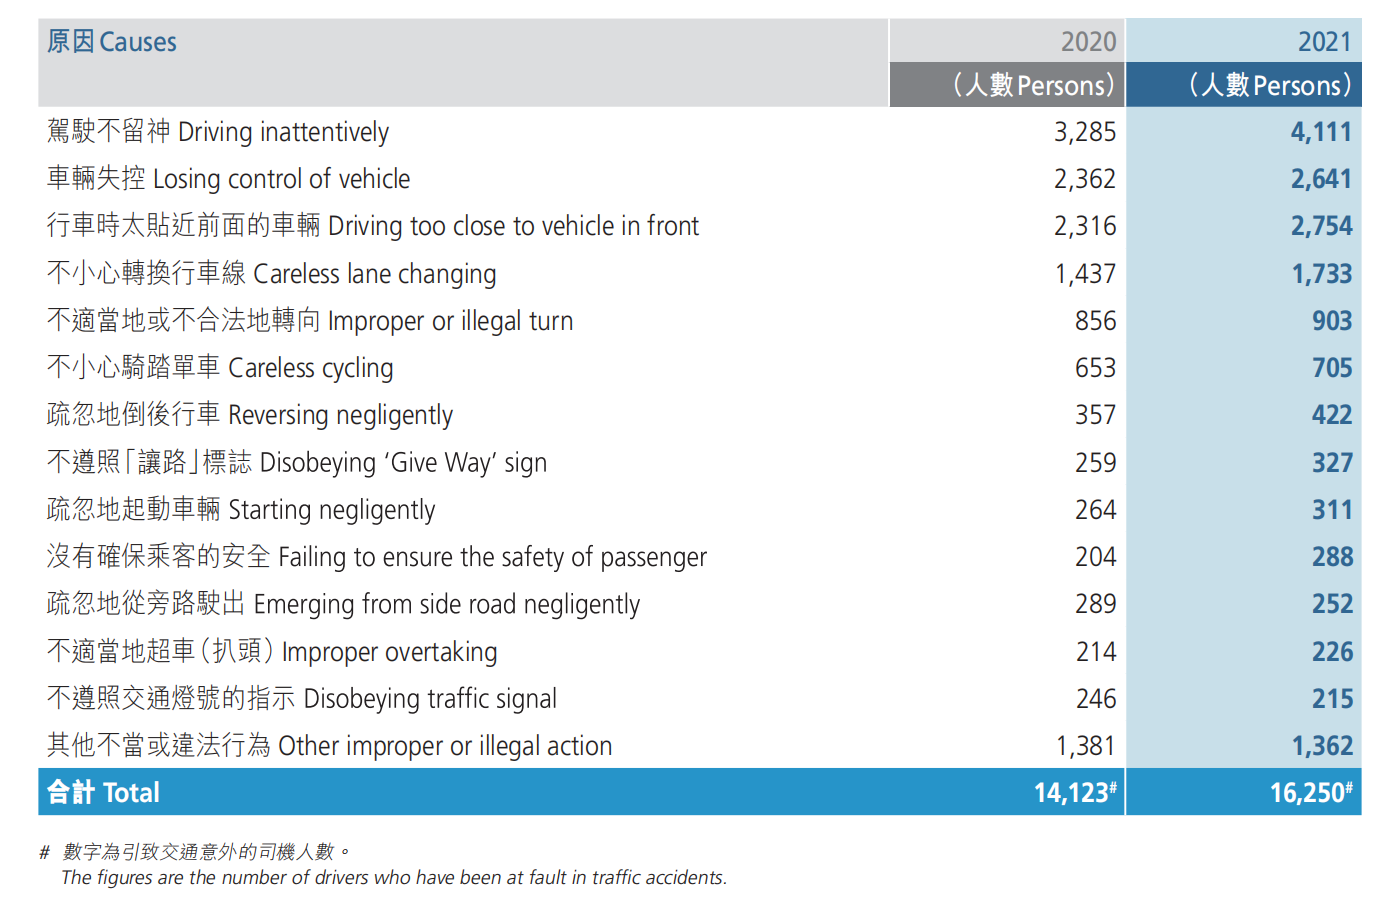 Driver Contributory Factors in Accidents, 2020 and 2021